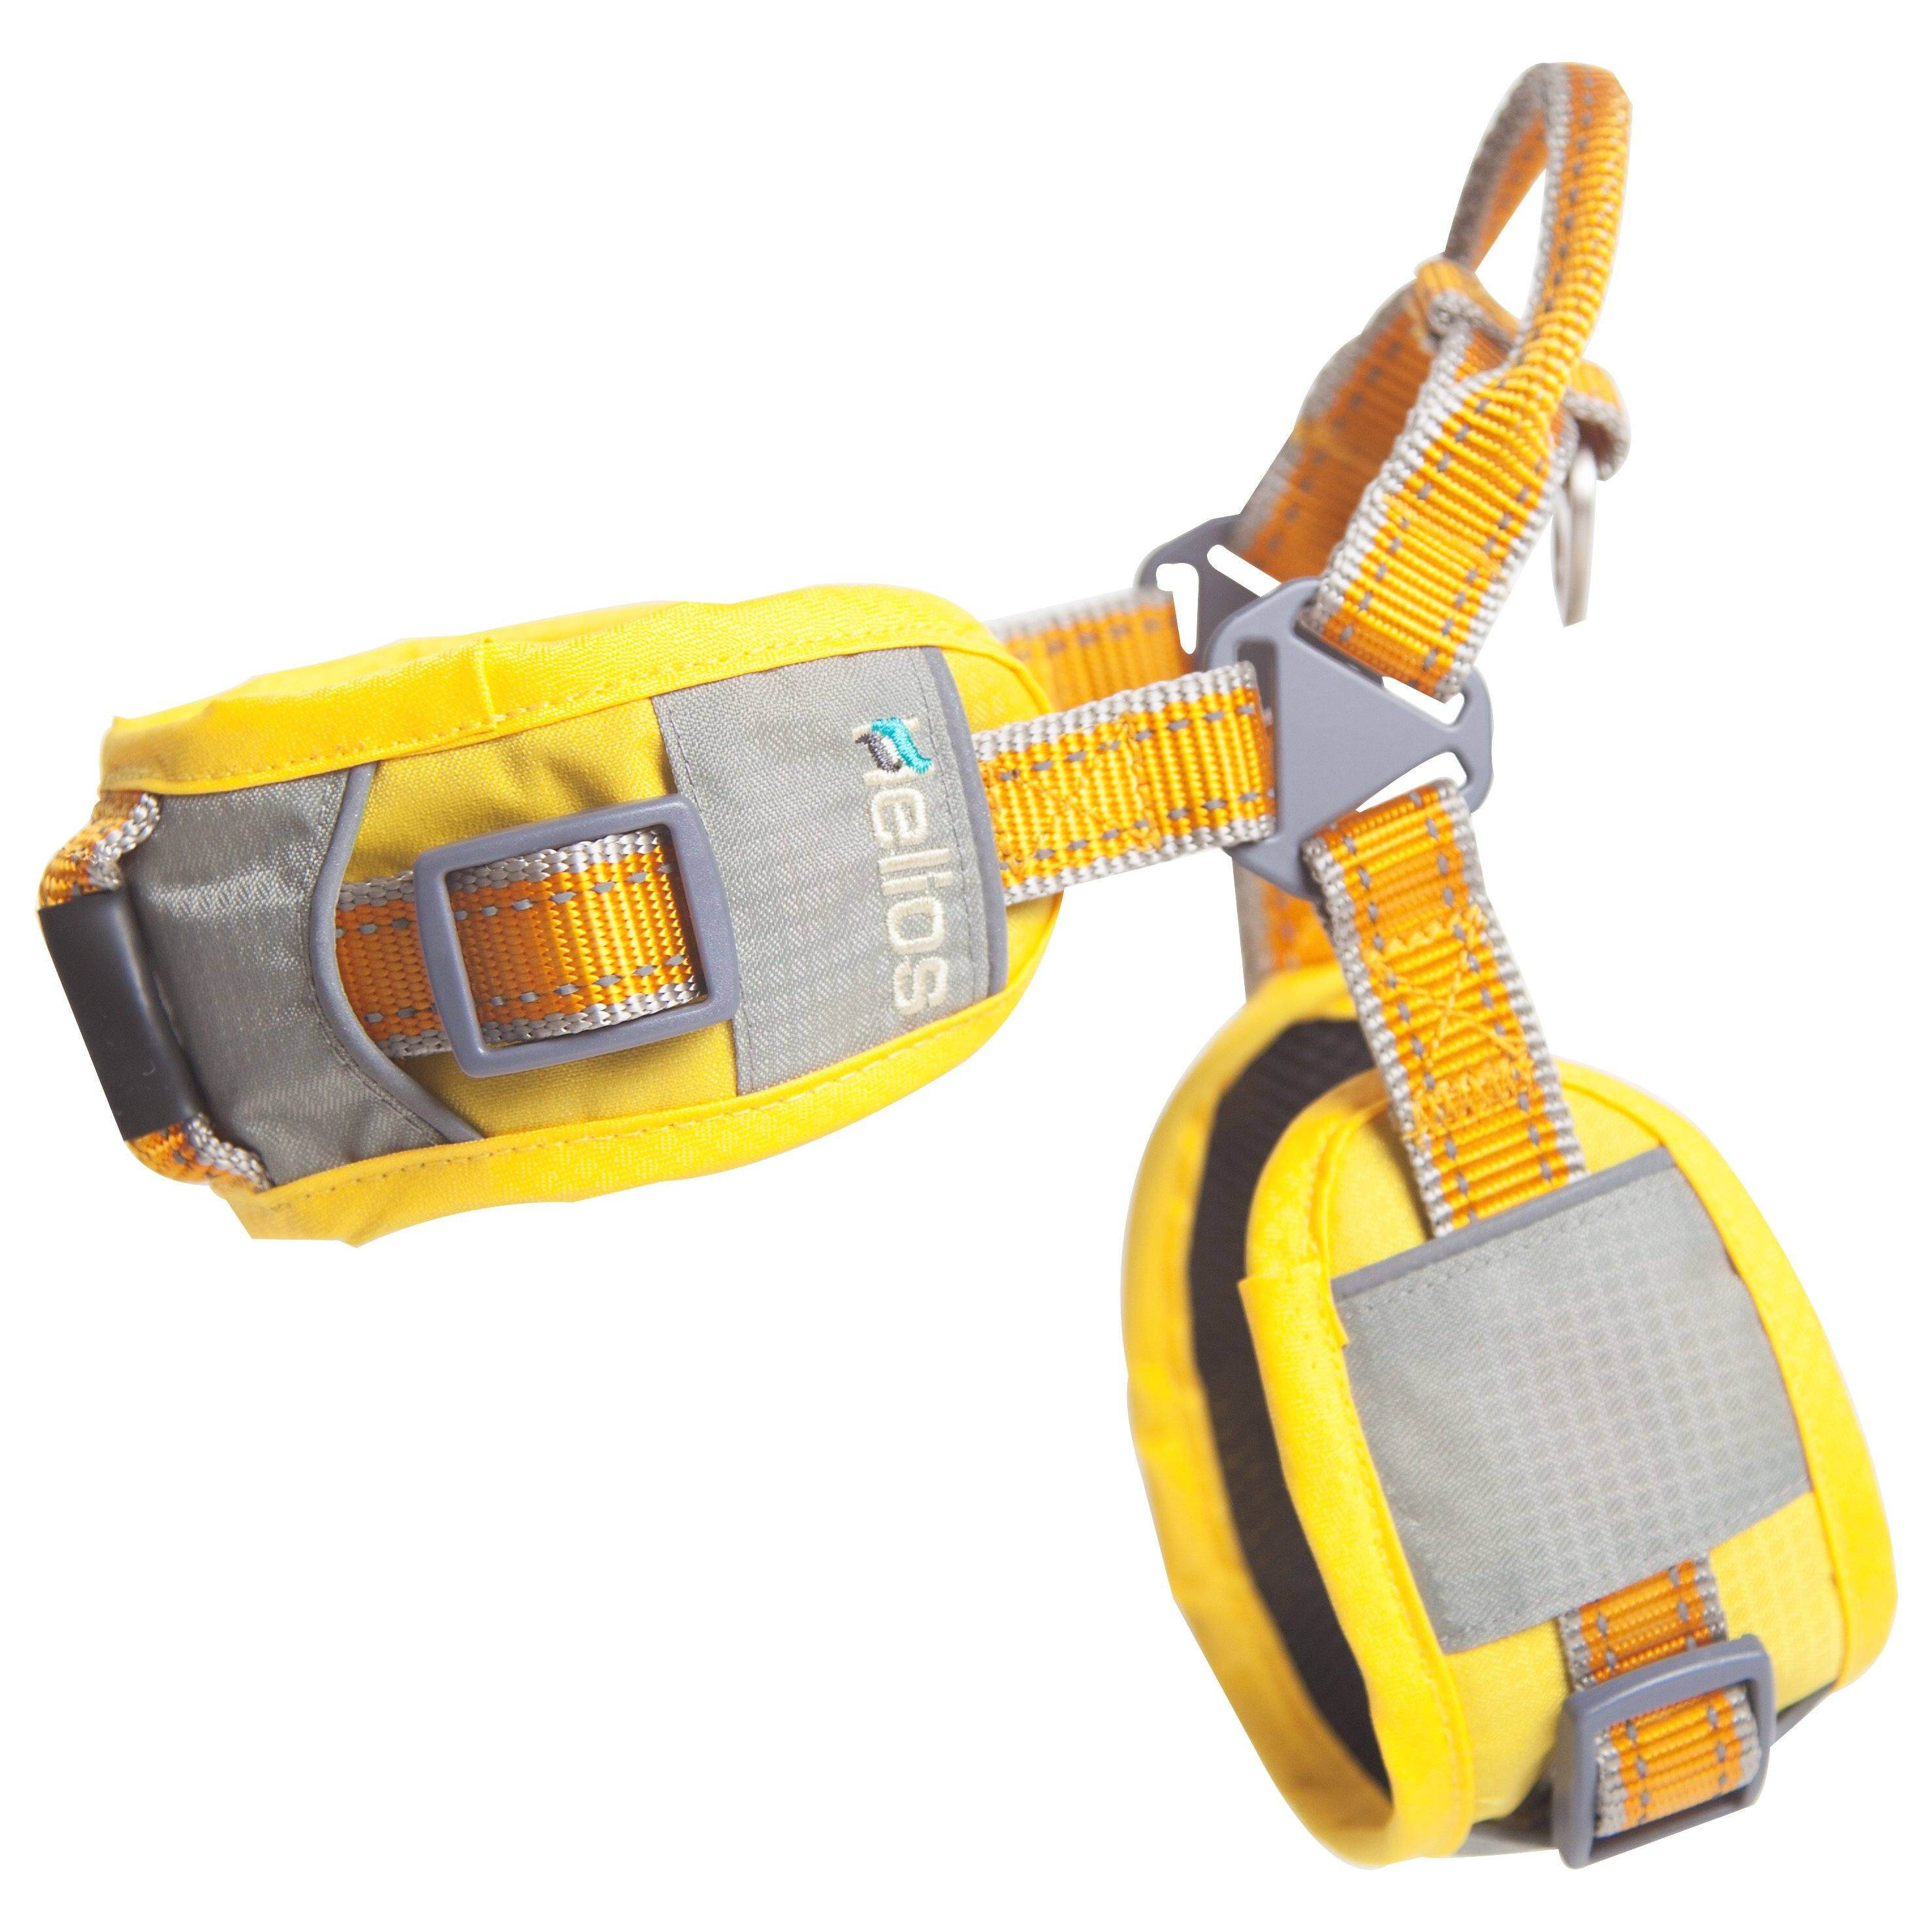 Dog Helios 'Geo-turf' Performance Adjustible and Reflective Dog Harness and Leash Small Yellow